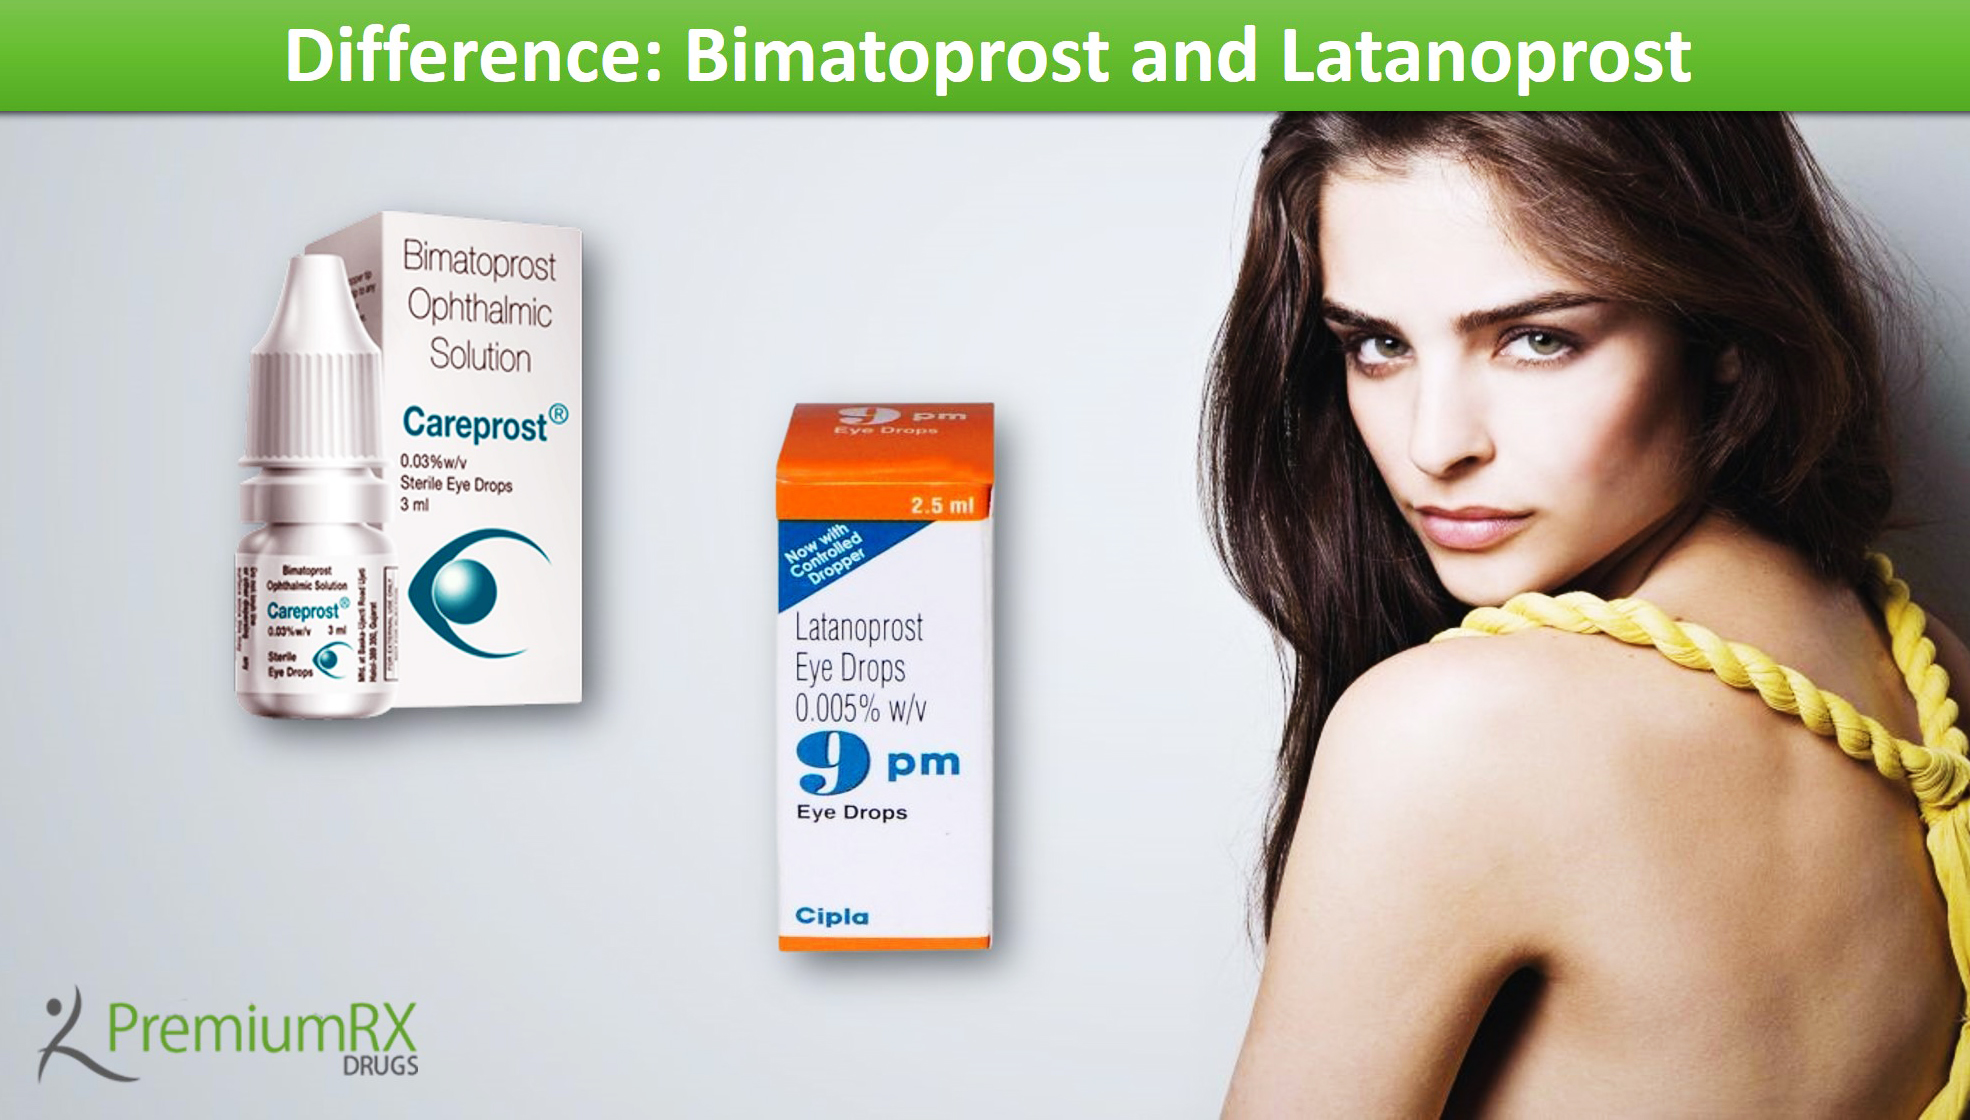 What is the difference between Bimatoprost and Latanoprost?